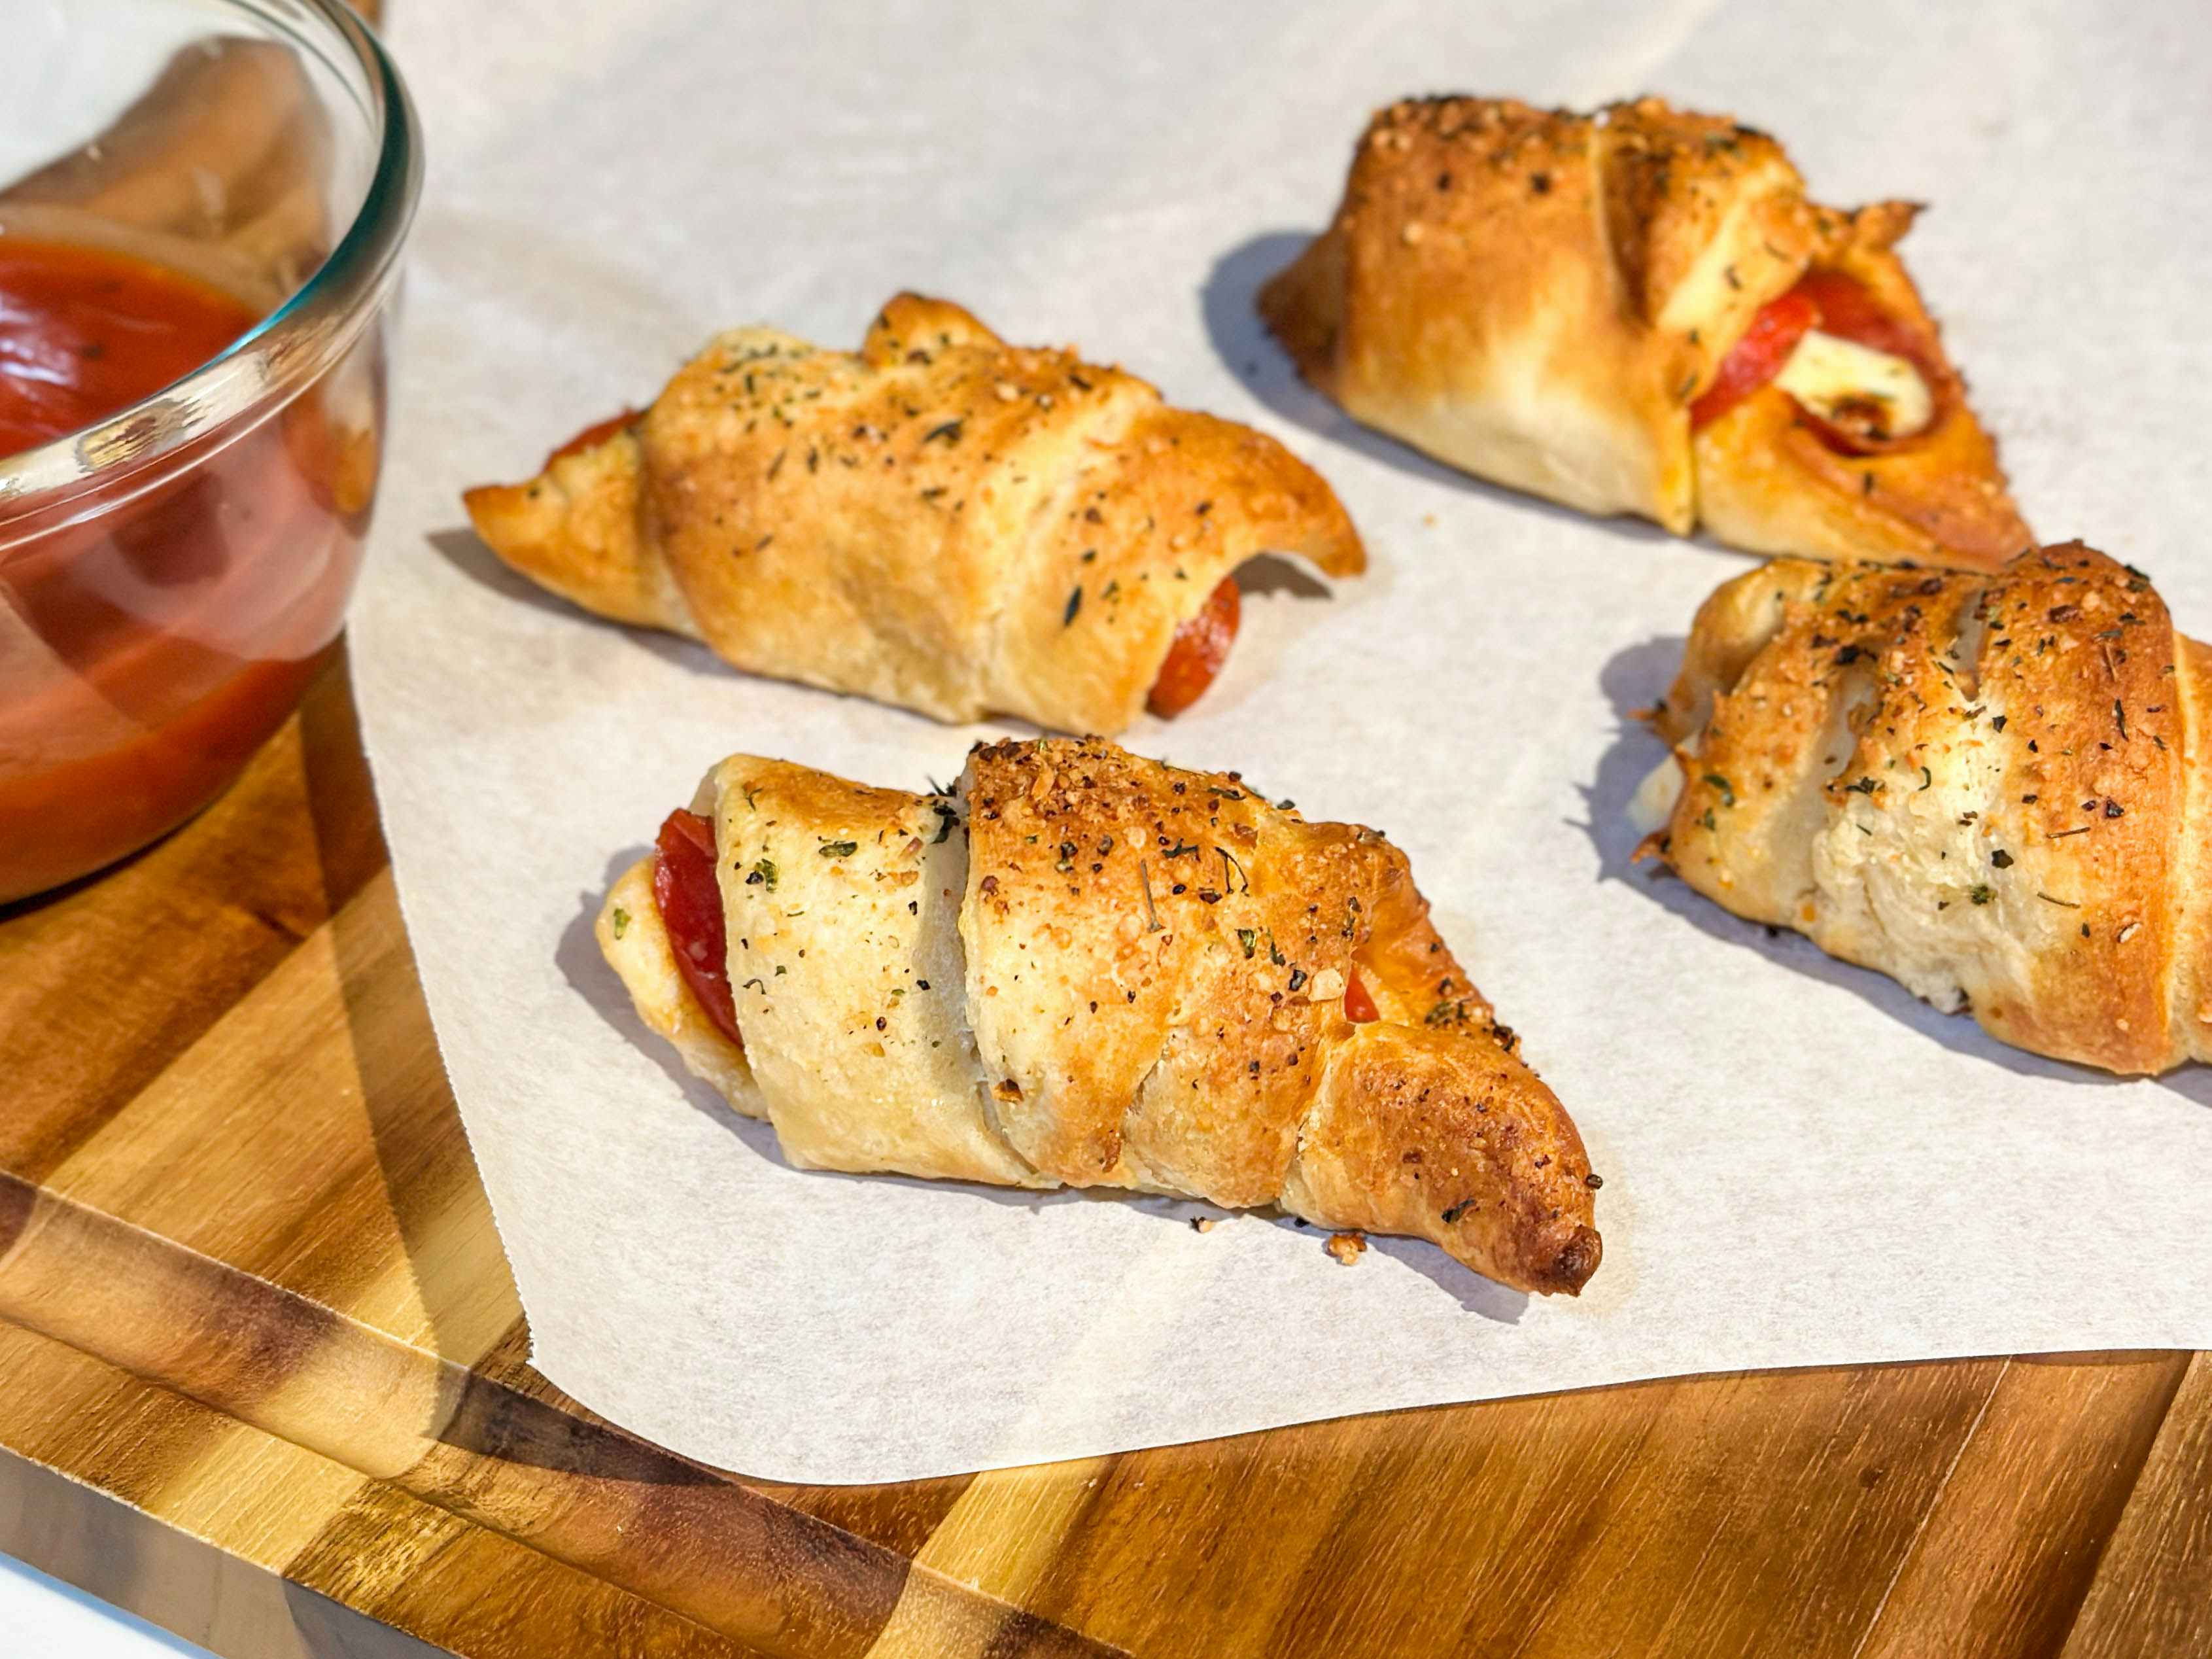 pizza like crescent rolls on a cutting board next to dip